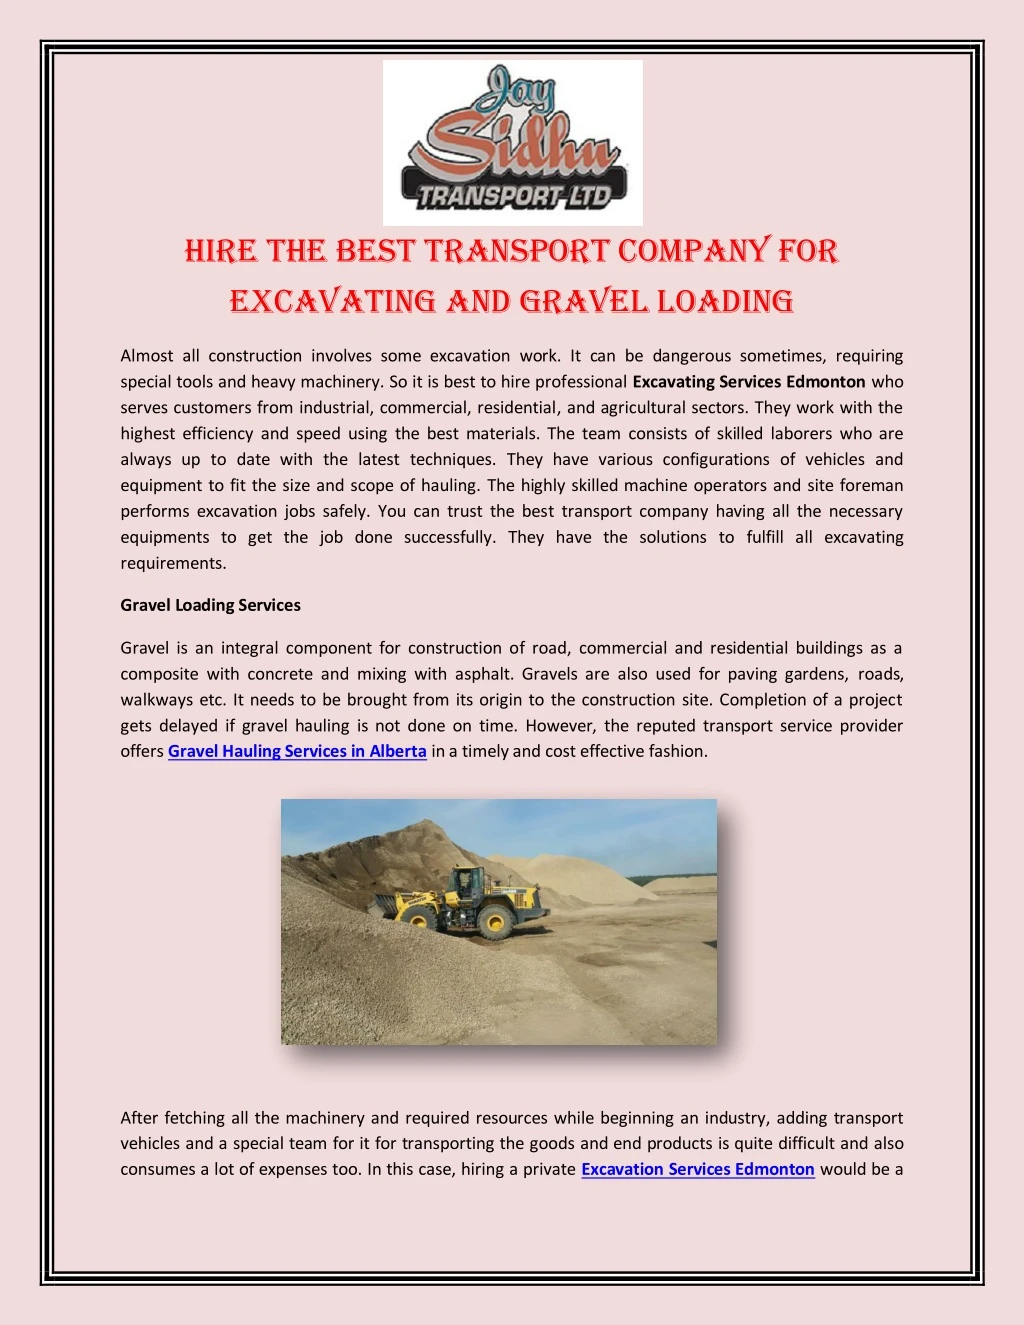 hire the best transport company for excavating